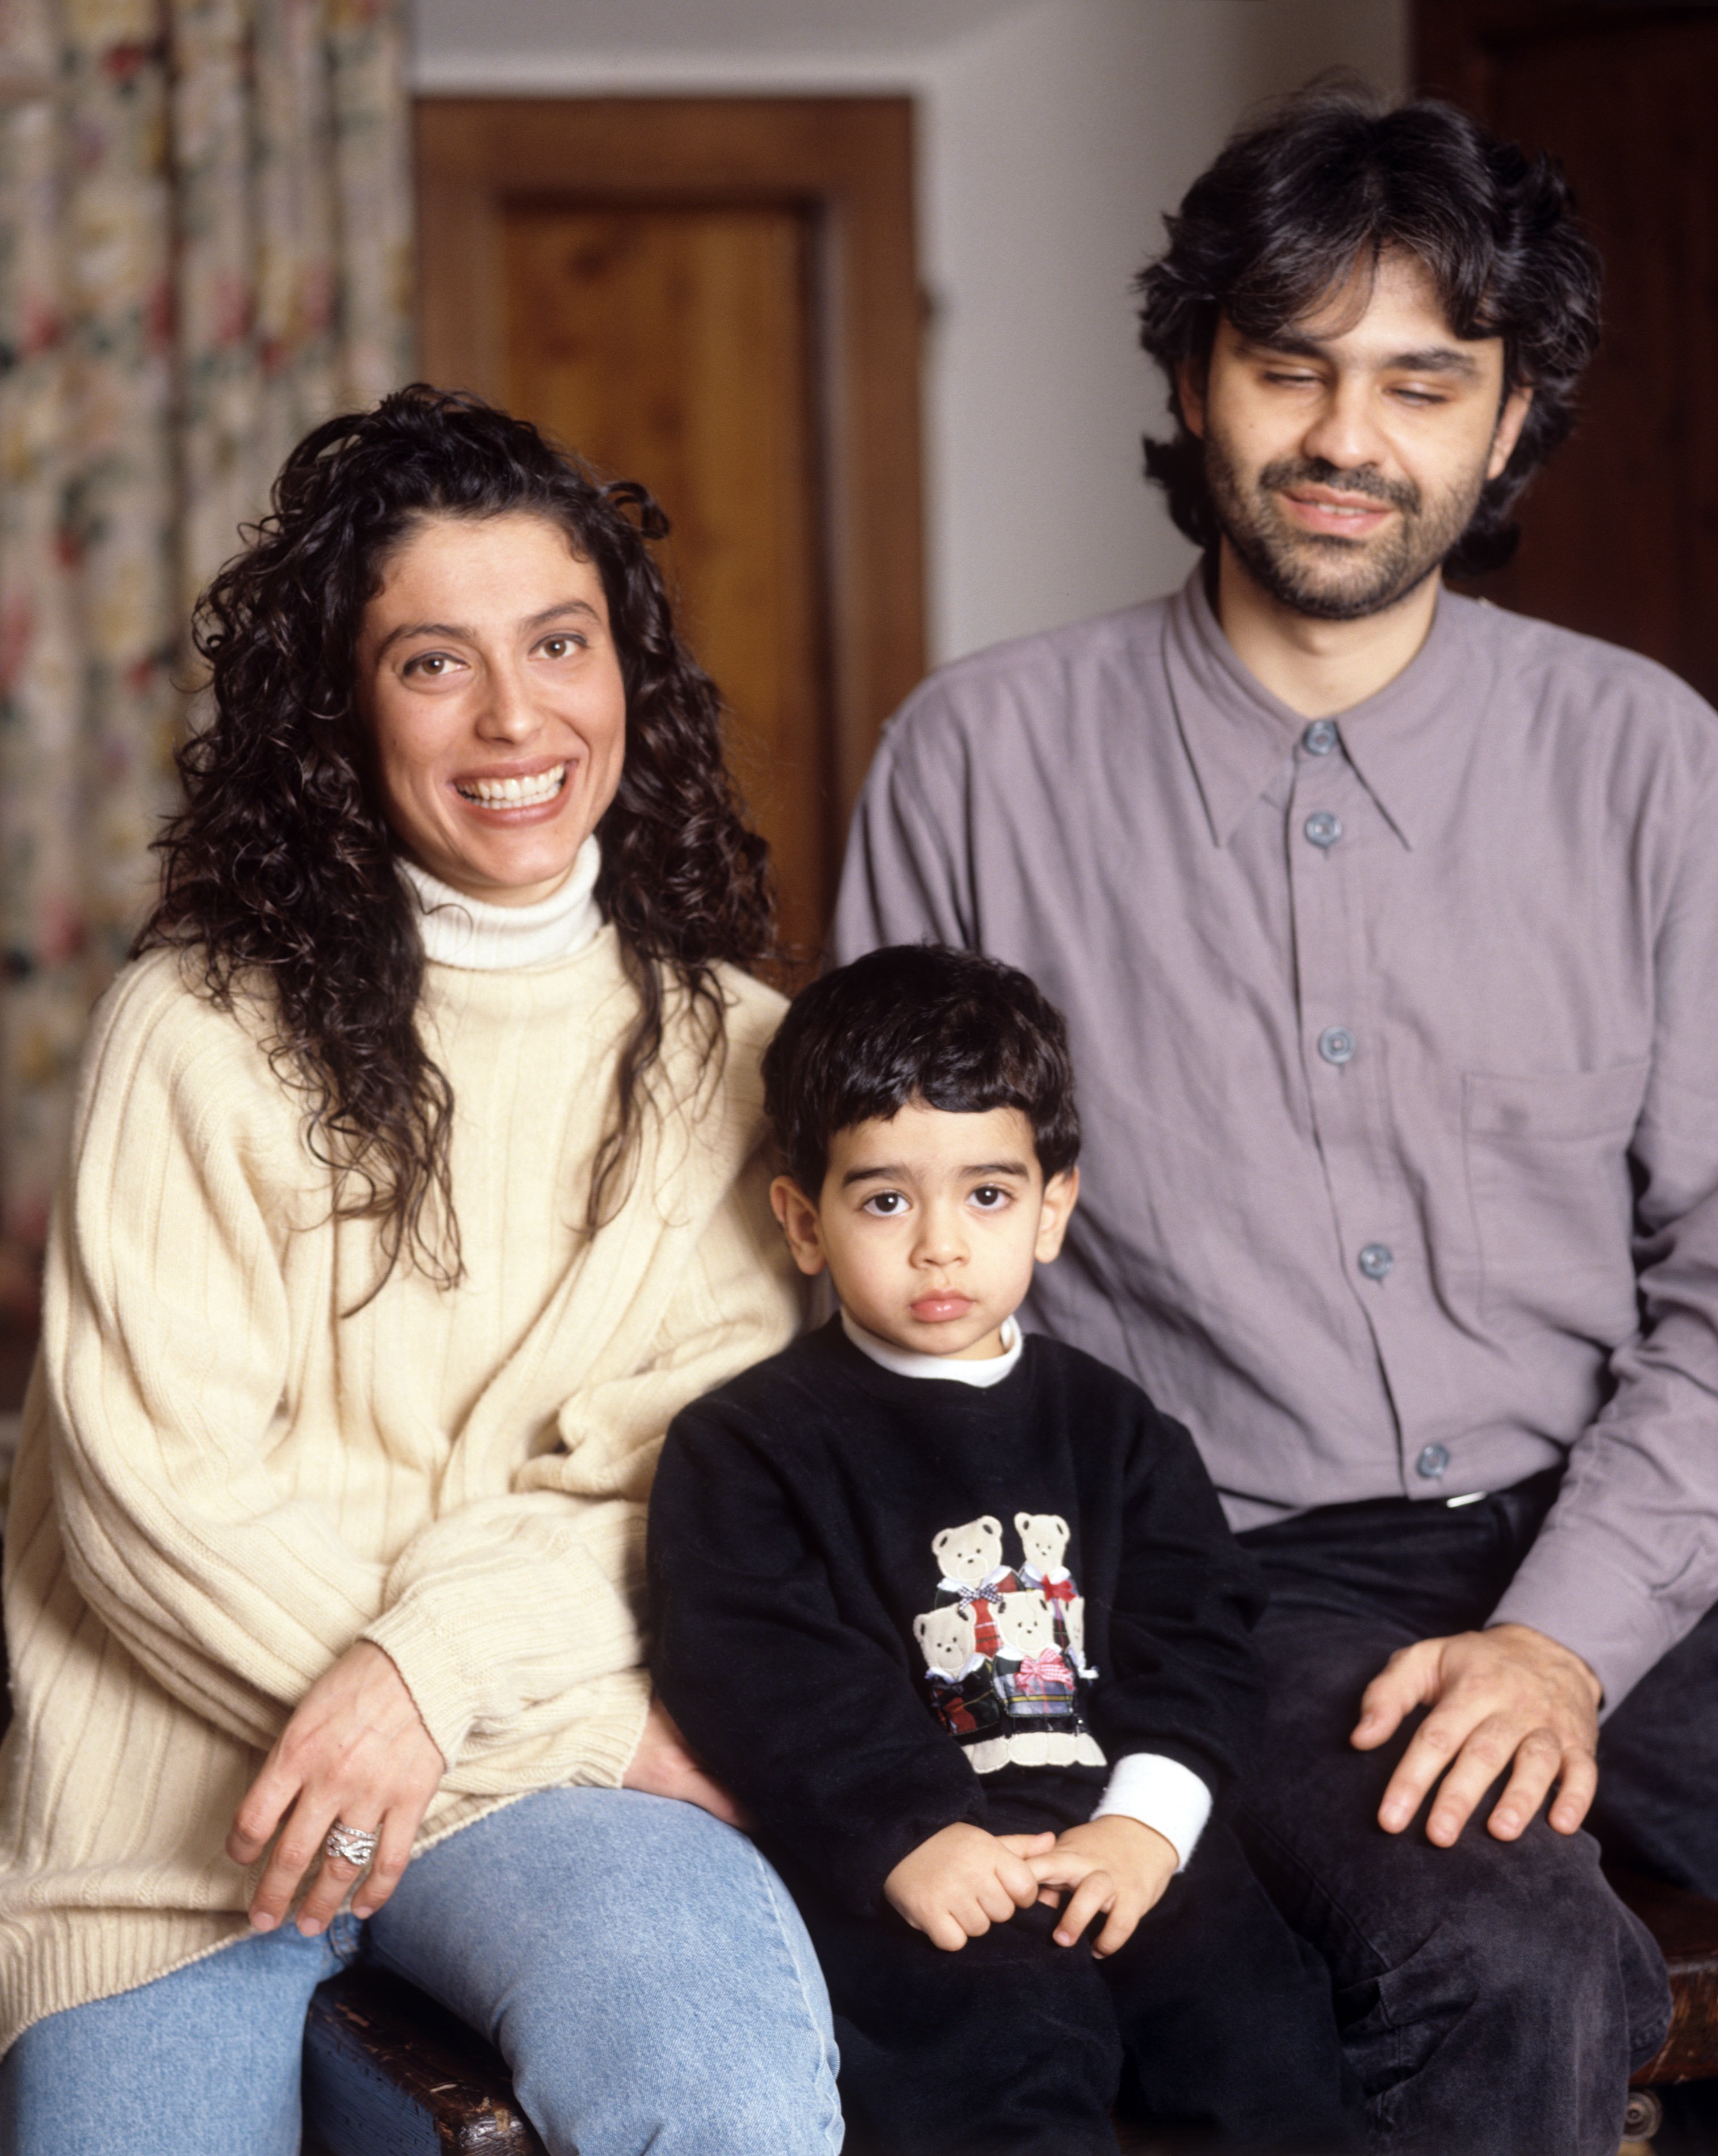 Andrea Bocelli, Enrica Cenzatti and their son, Amos, in Tuscany, Italy, in 1997. | Source: Getty Images